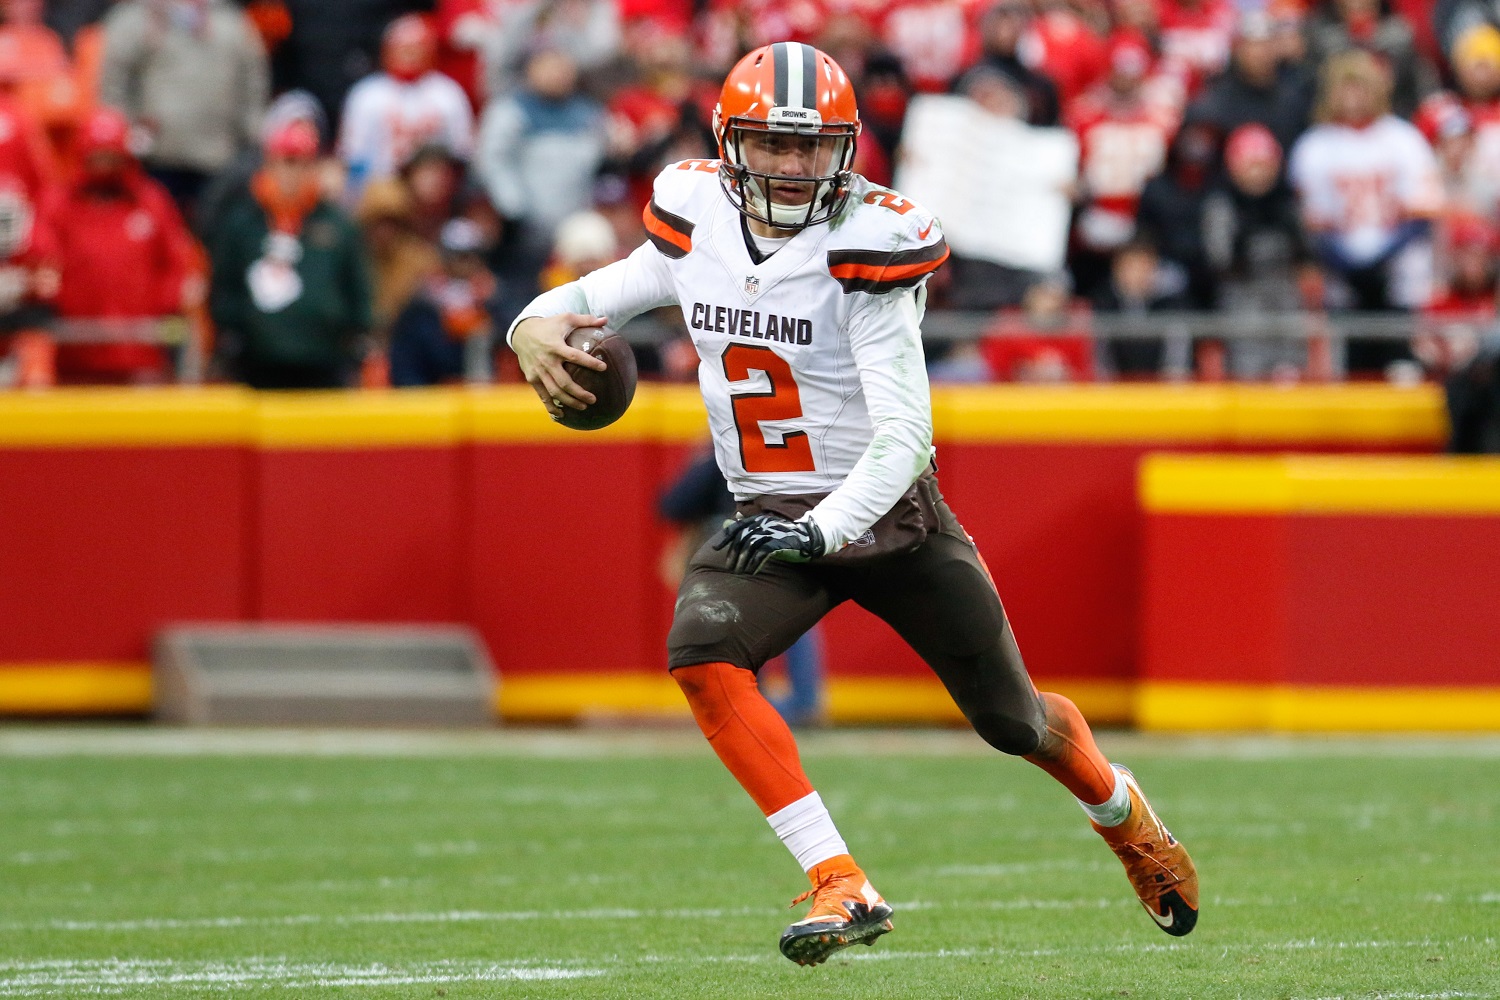 Johnny Manziel last two seasons in the NFL with the Cleveland Browns